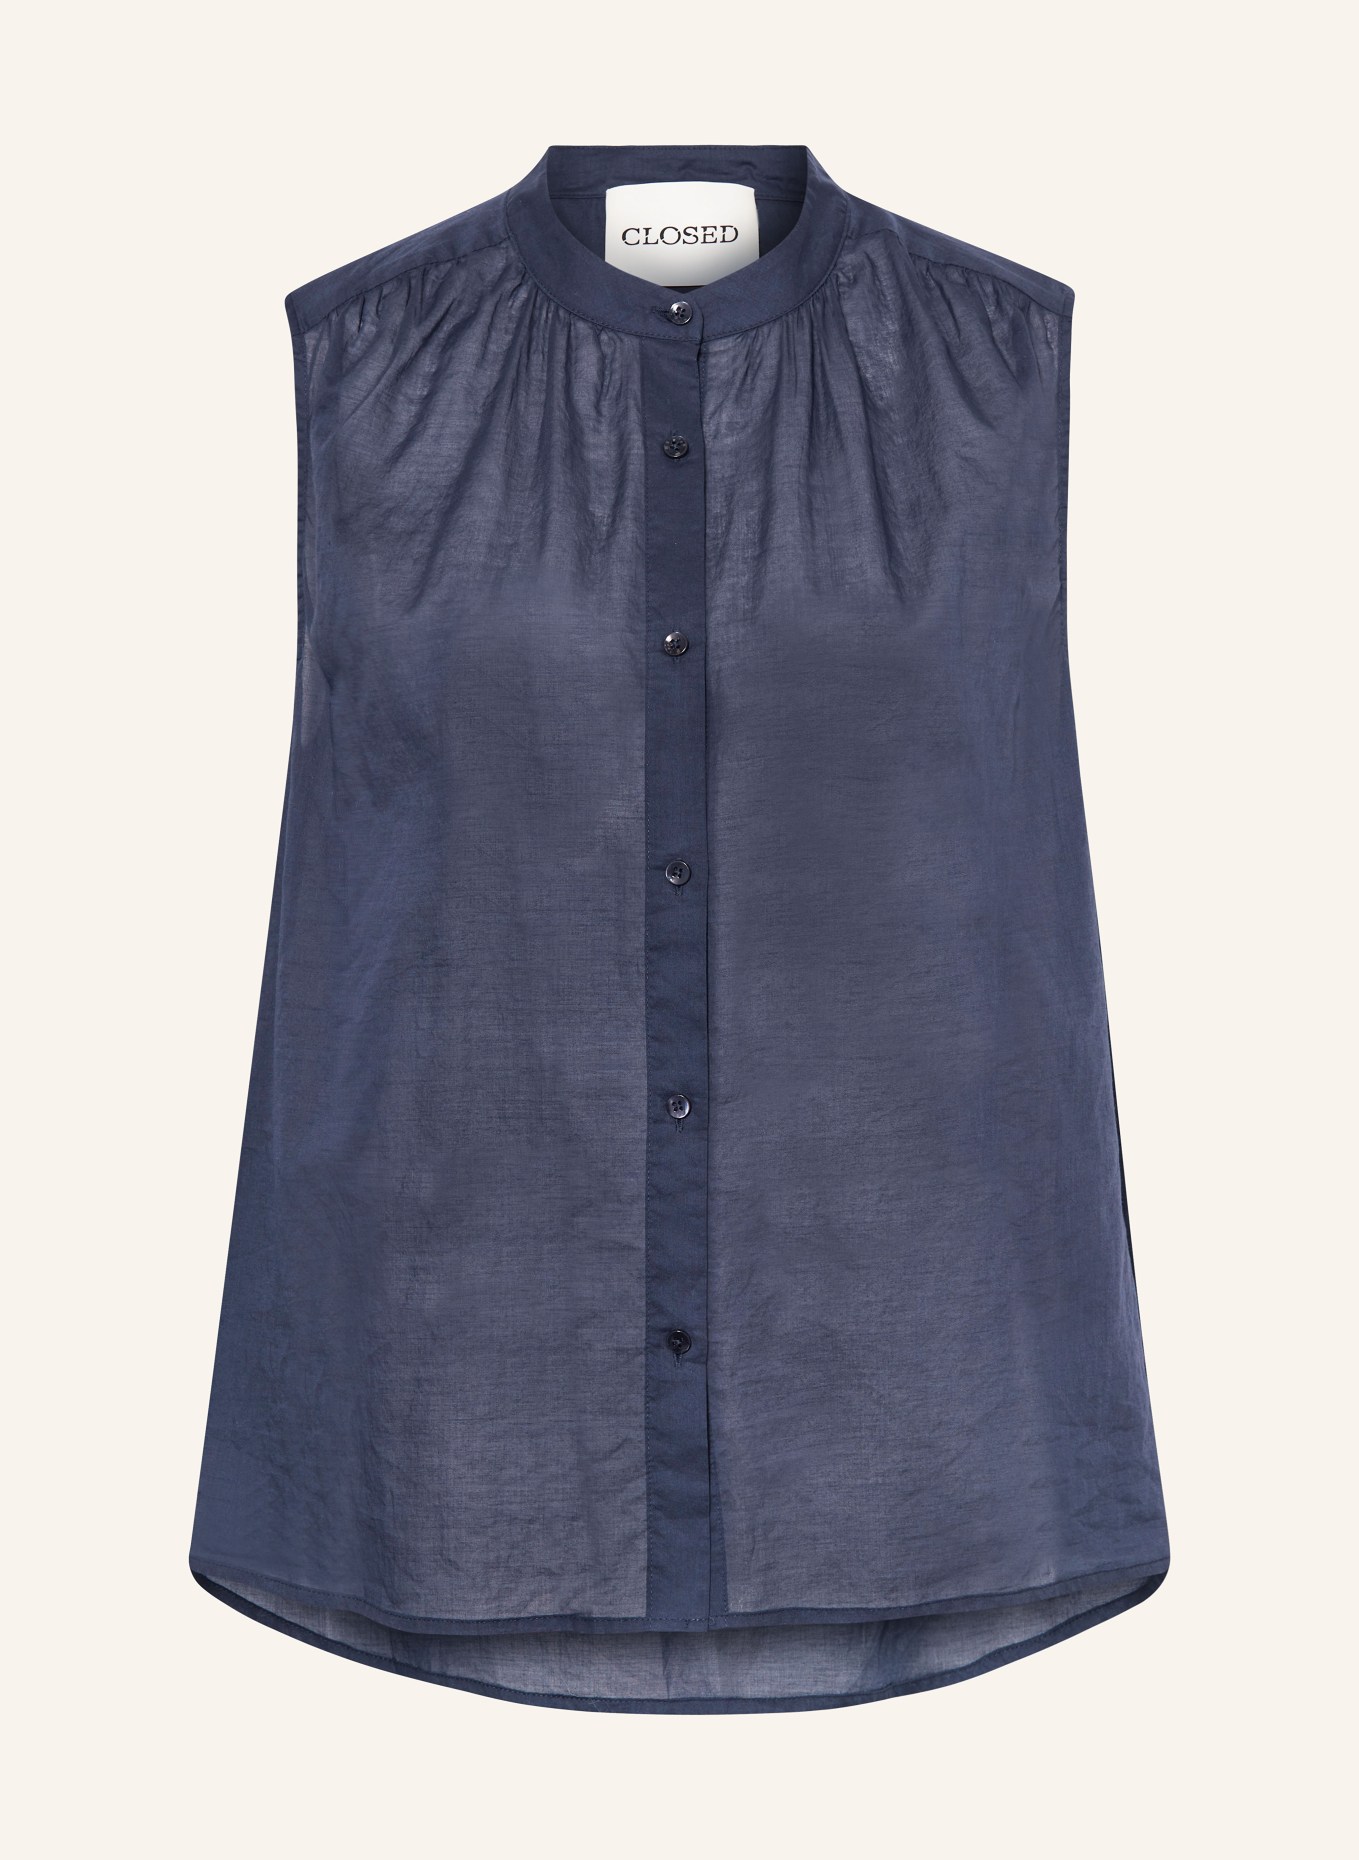 CLOSED Blouse top, Color: DARK BLUE (Image 1)